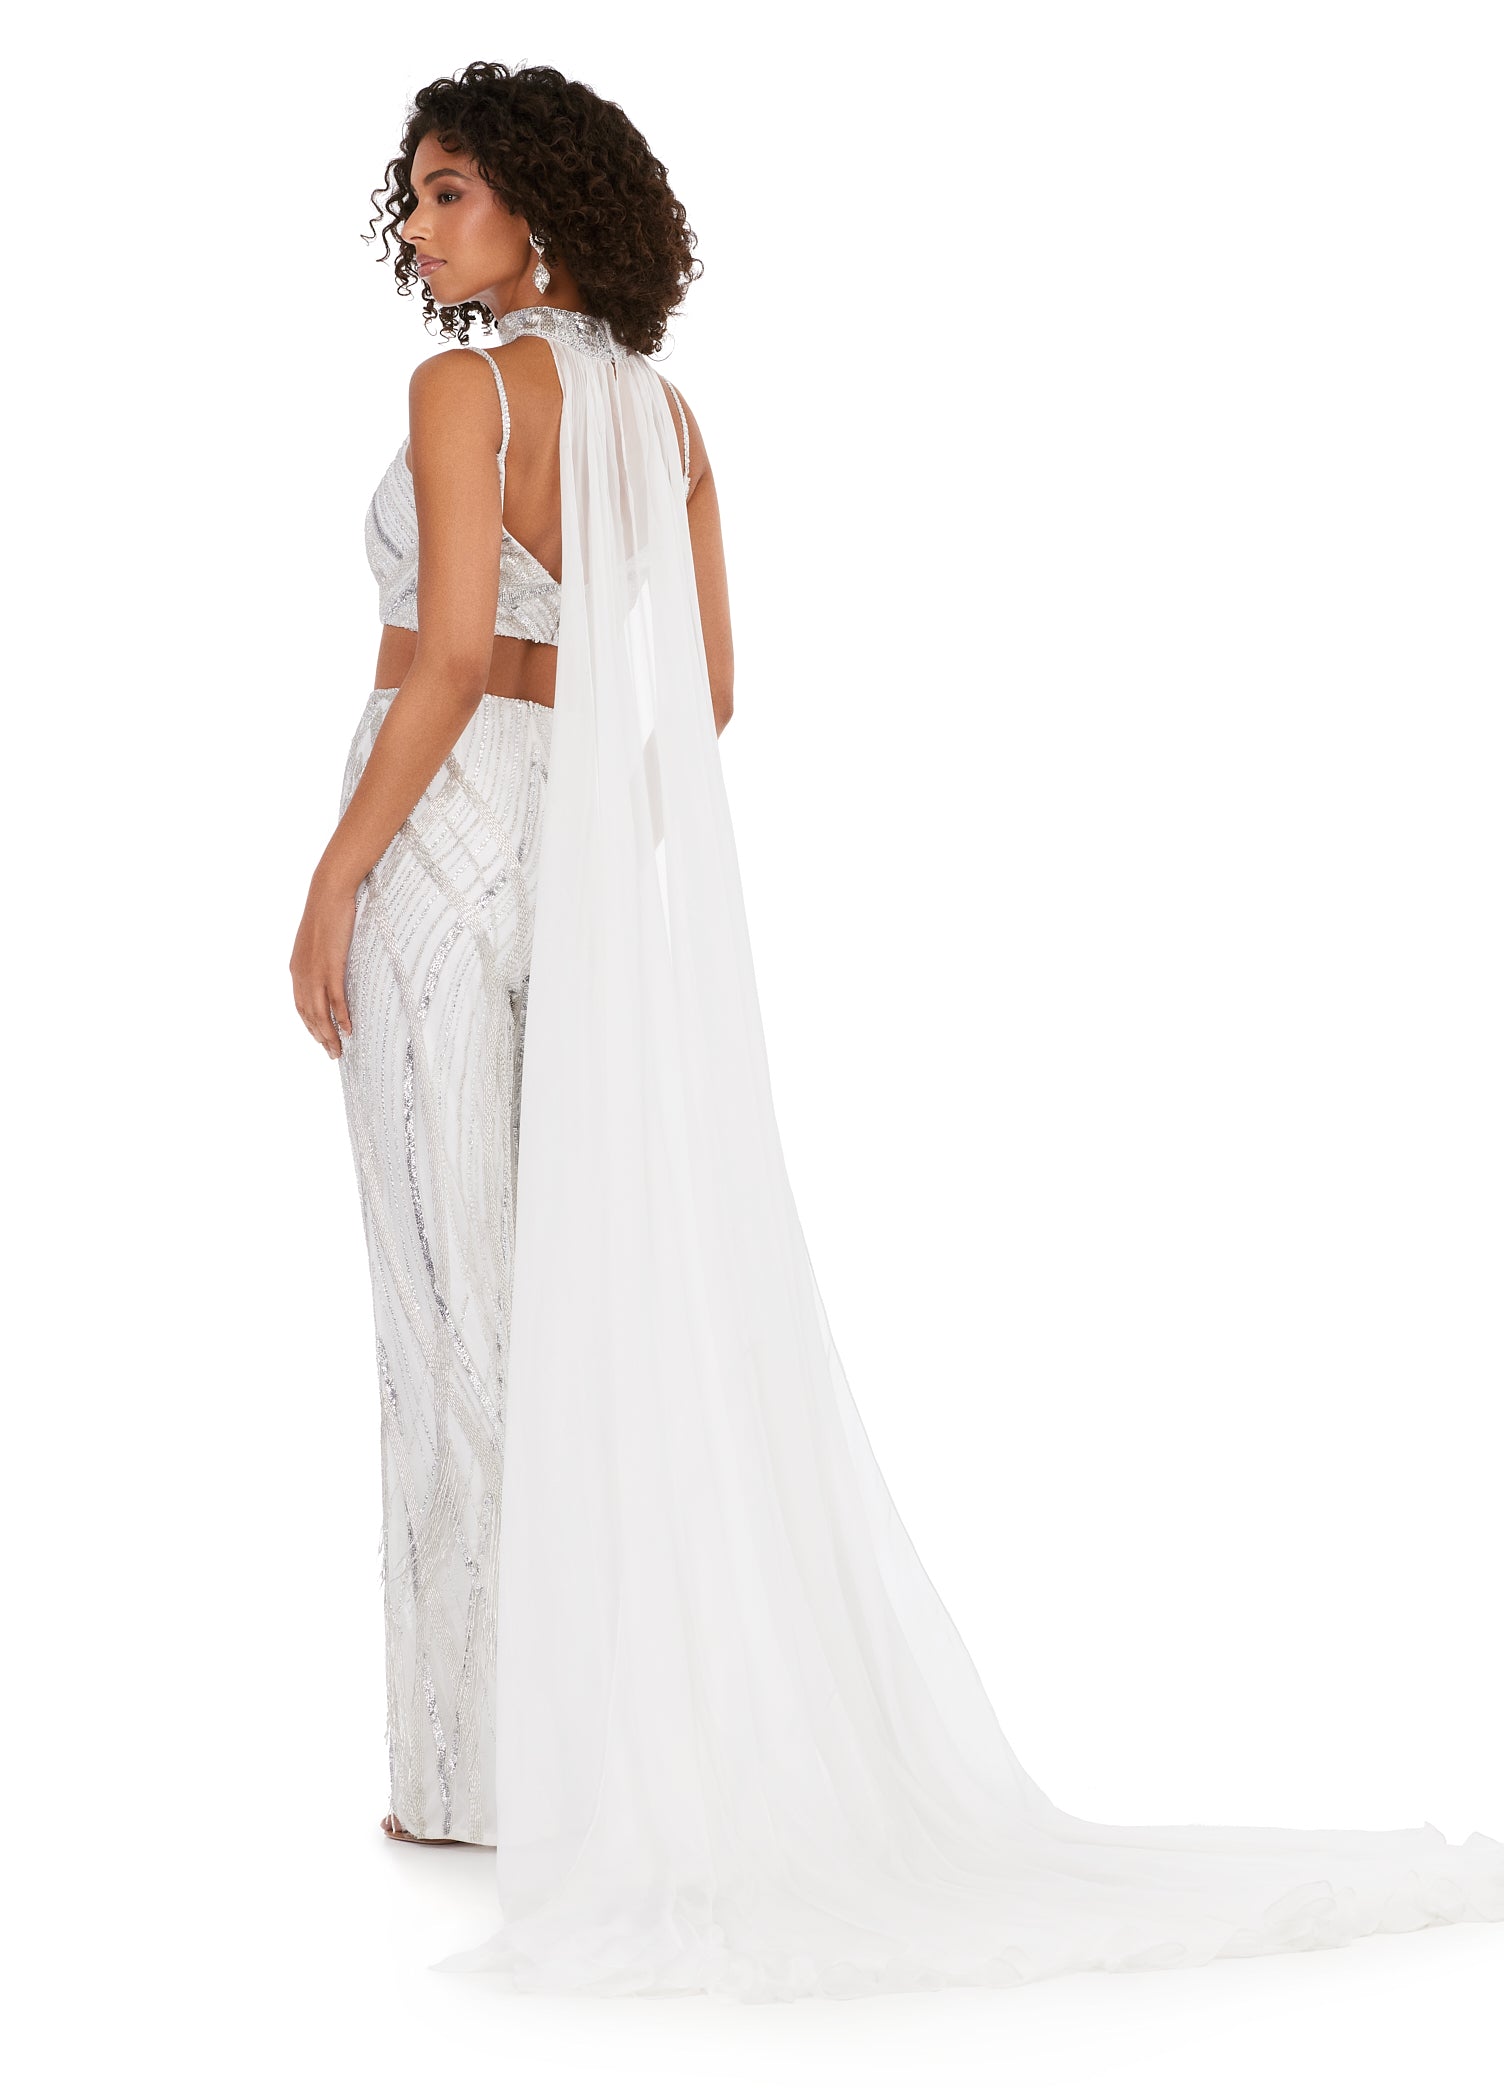 Ashley Lauren 11385 Fully Beaded 2-Piece With Chiffon Cape Spaghetti Strap Jumpsuit. Bring on the drama in this jumpsuit. The bustier and pants are adorned with an intricate bead pattern. The bead pattern continues along the chocker. The choker is complete with a long chiffon cape.